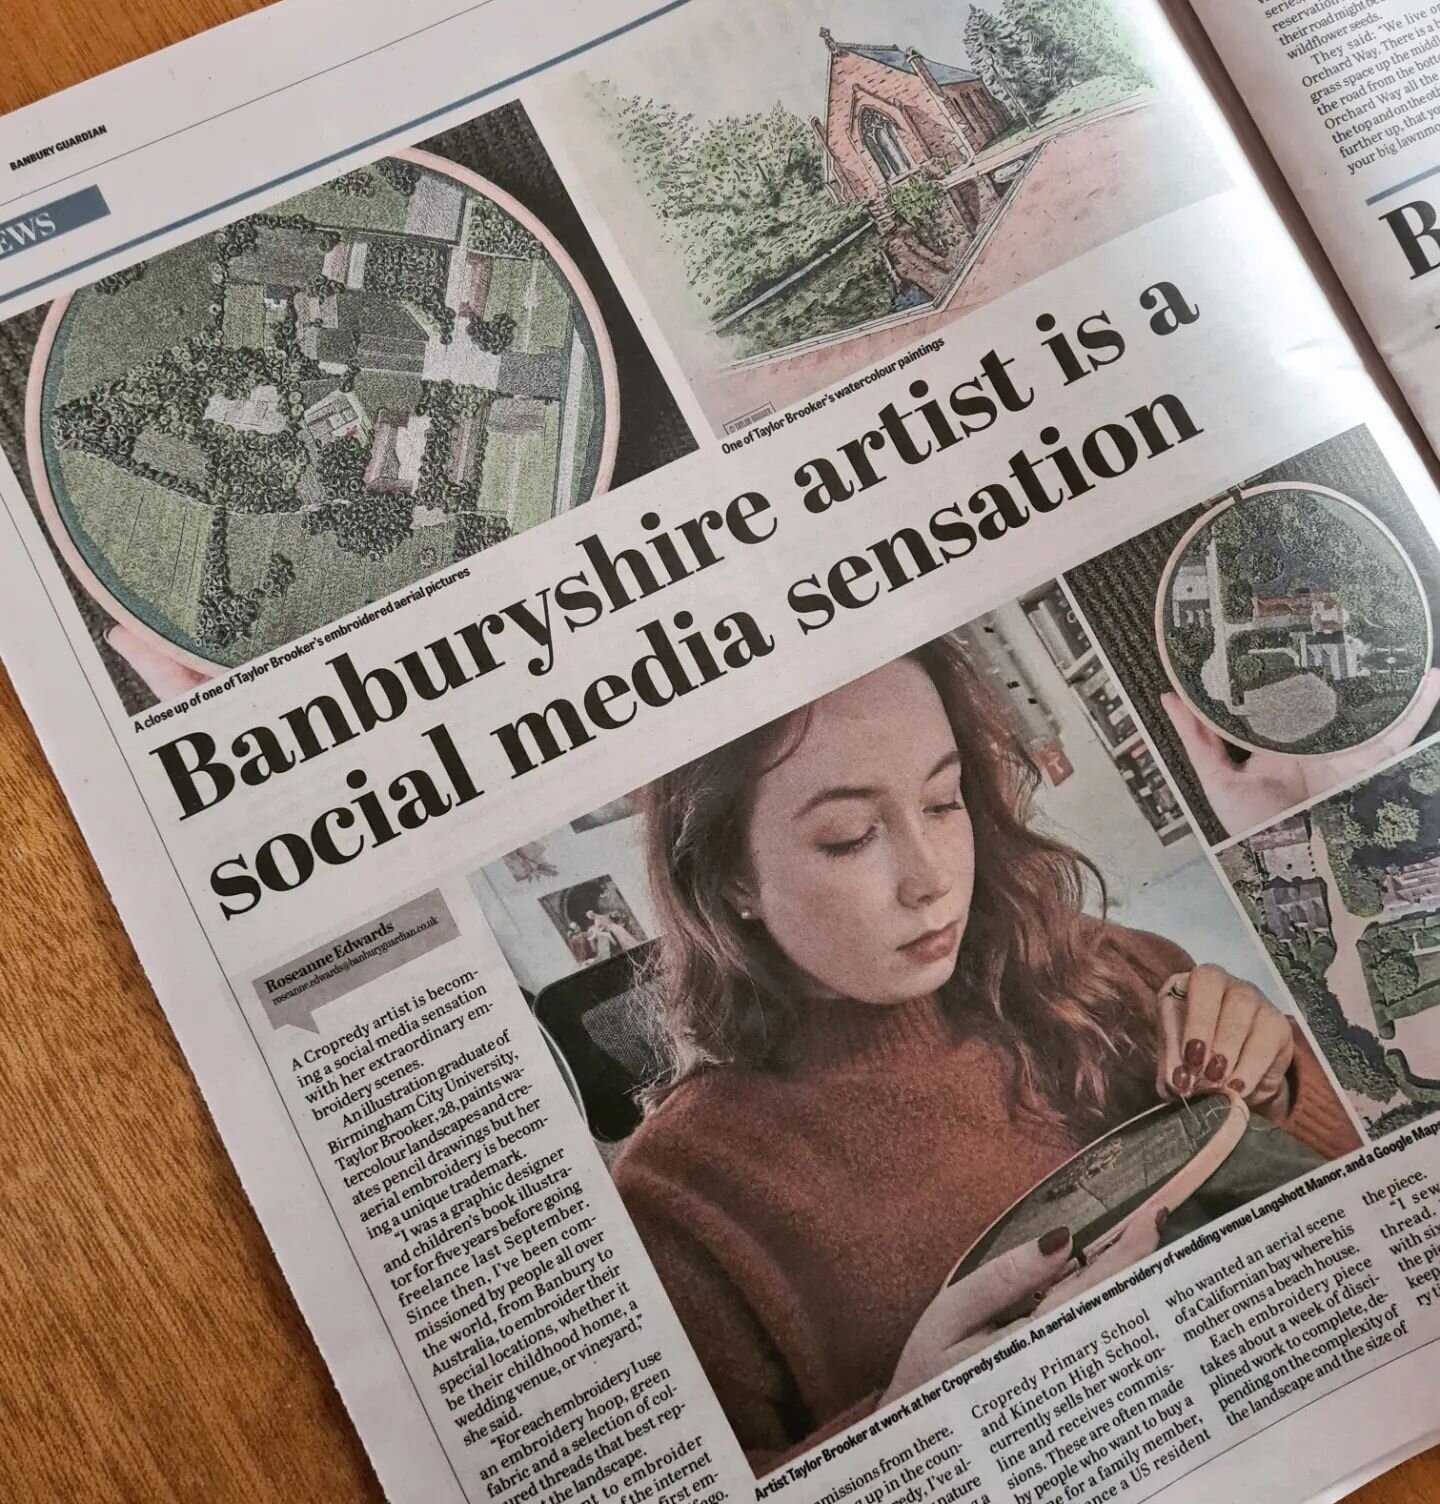 I'm in the newspaper! 💫
The last time I was in it was 20 years ago when there was a duck at my school 😭 (swipe for the photo). I loved making art back then, so it's funny to be back in the paper with my art all this time later! 🎨
.
.
#art #artist 